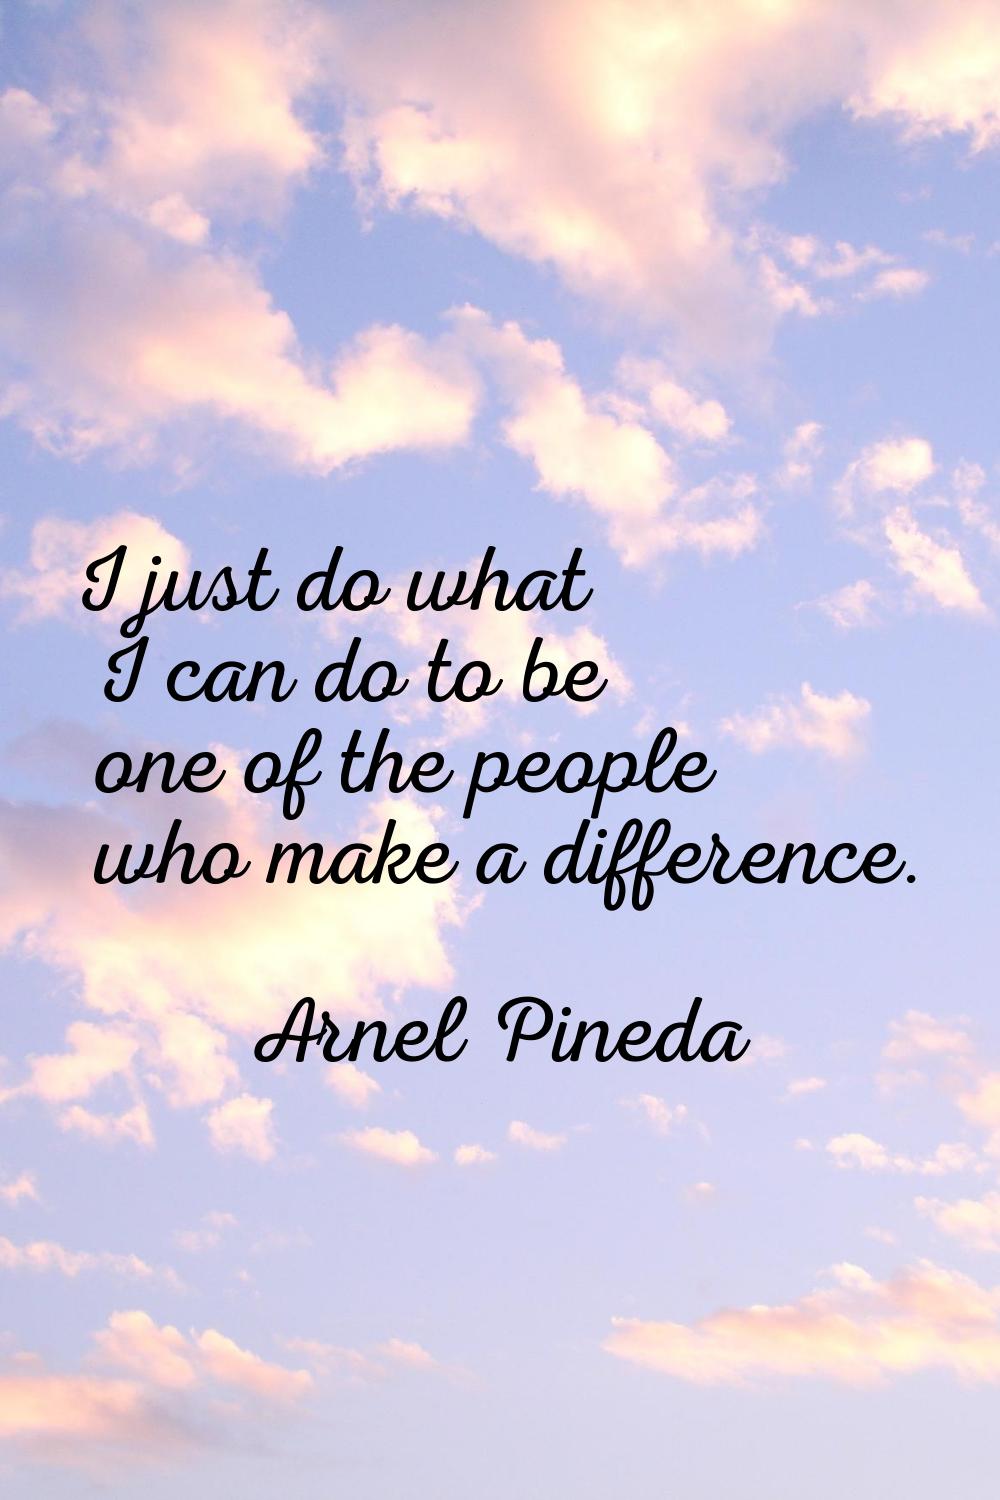 I just do what I can do to be one of the people who make a difference.